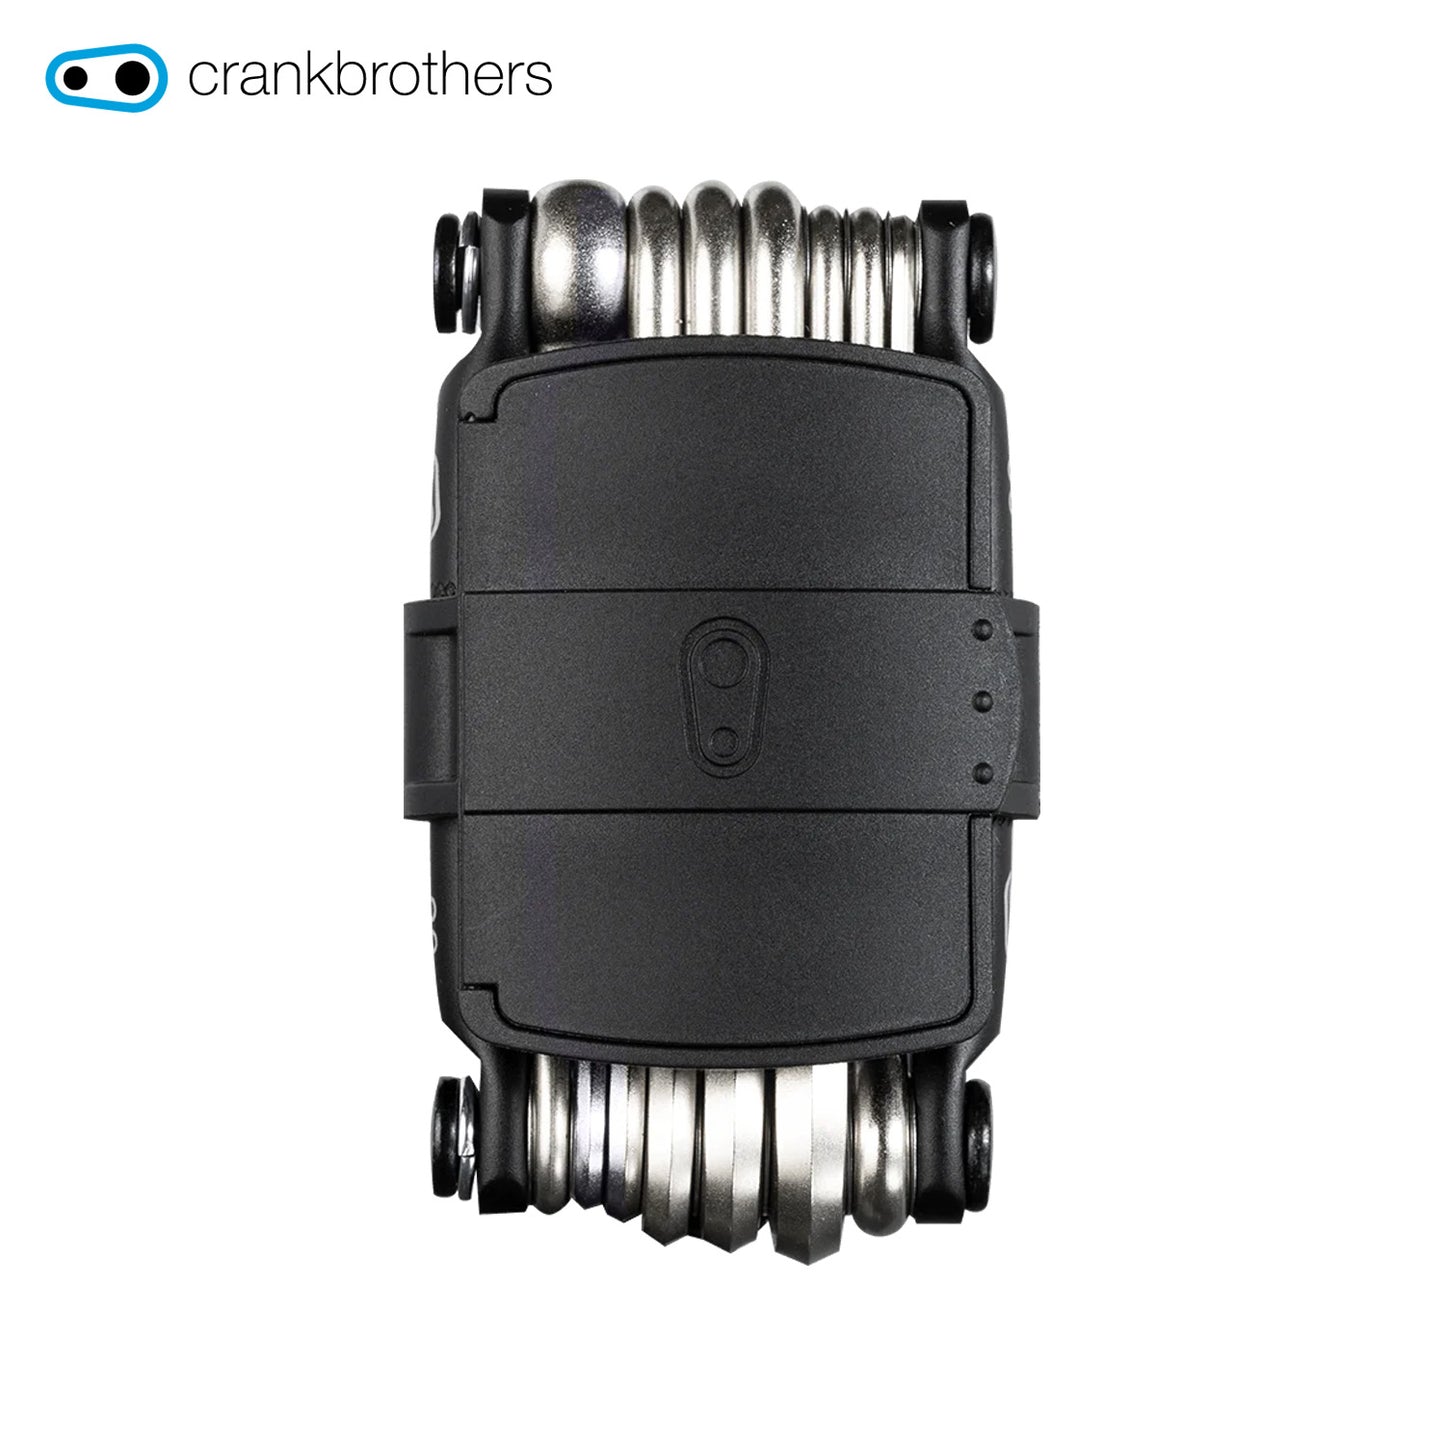 Crankbrothers M20 Multi-Tool with Chain Breaker - Black